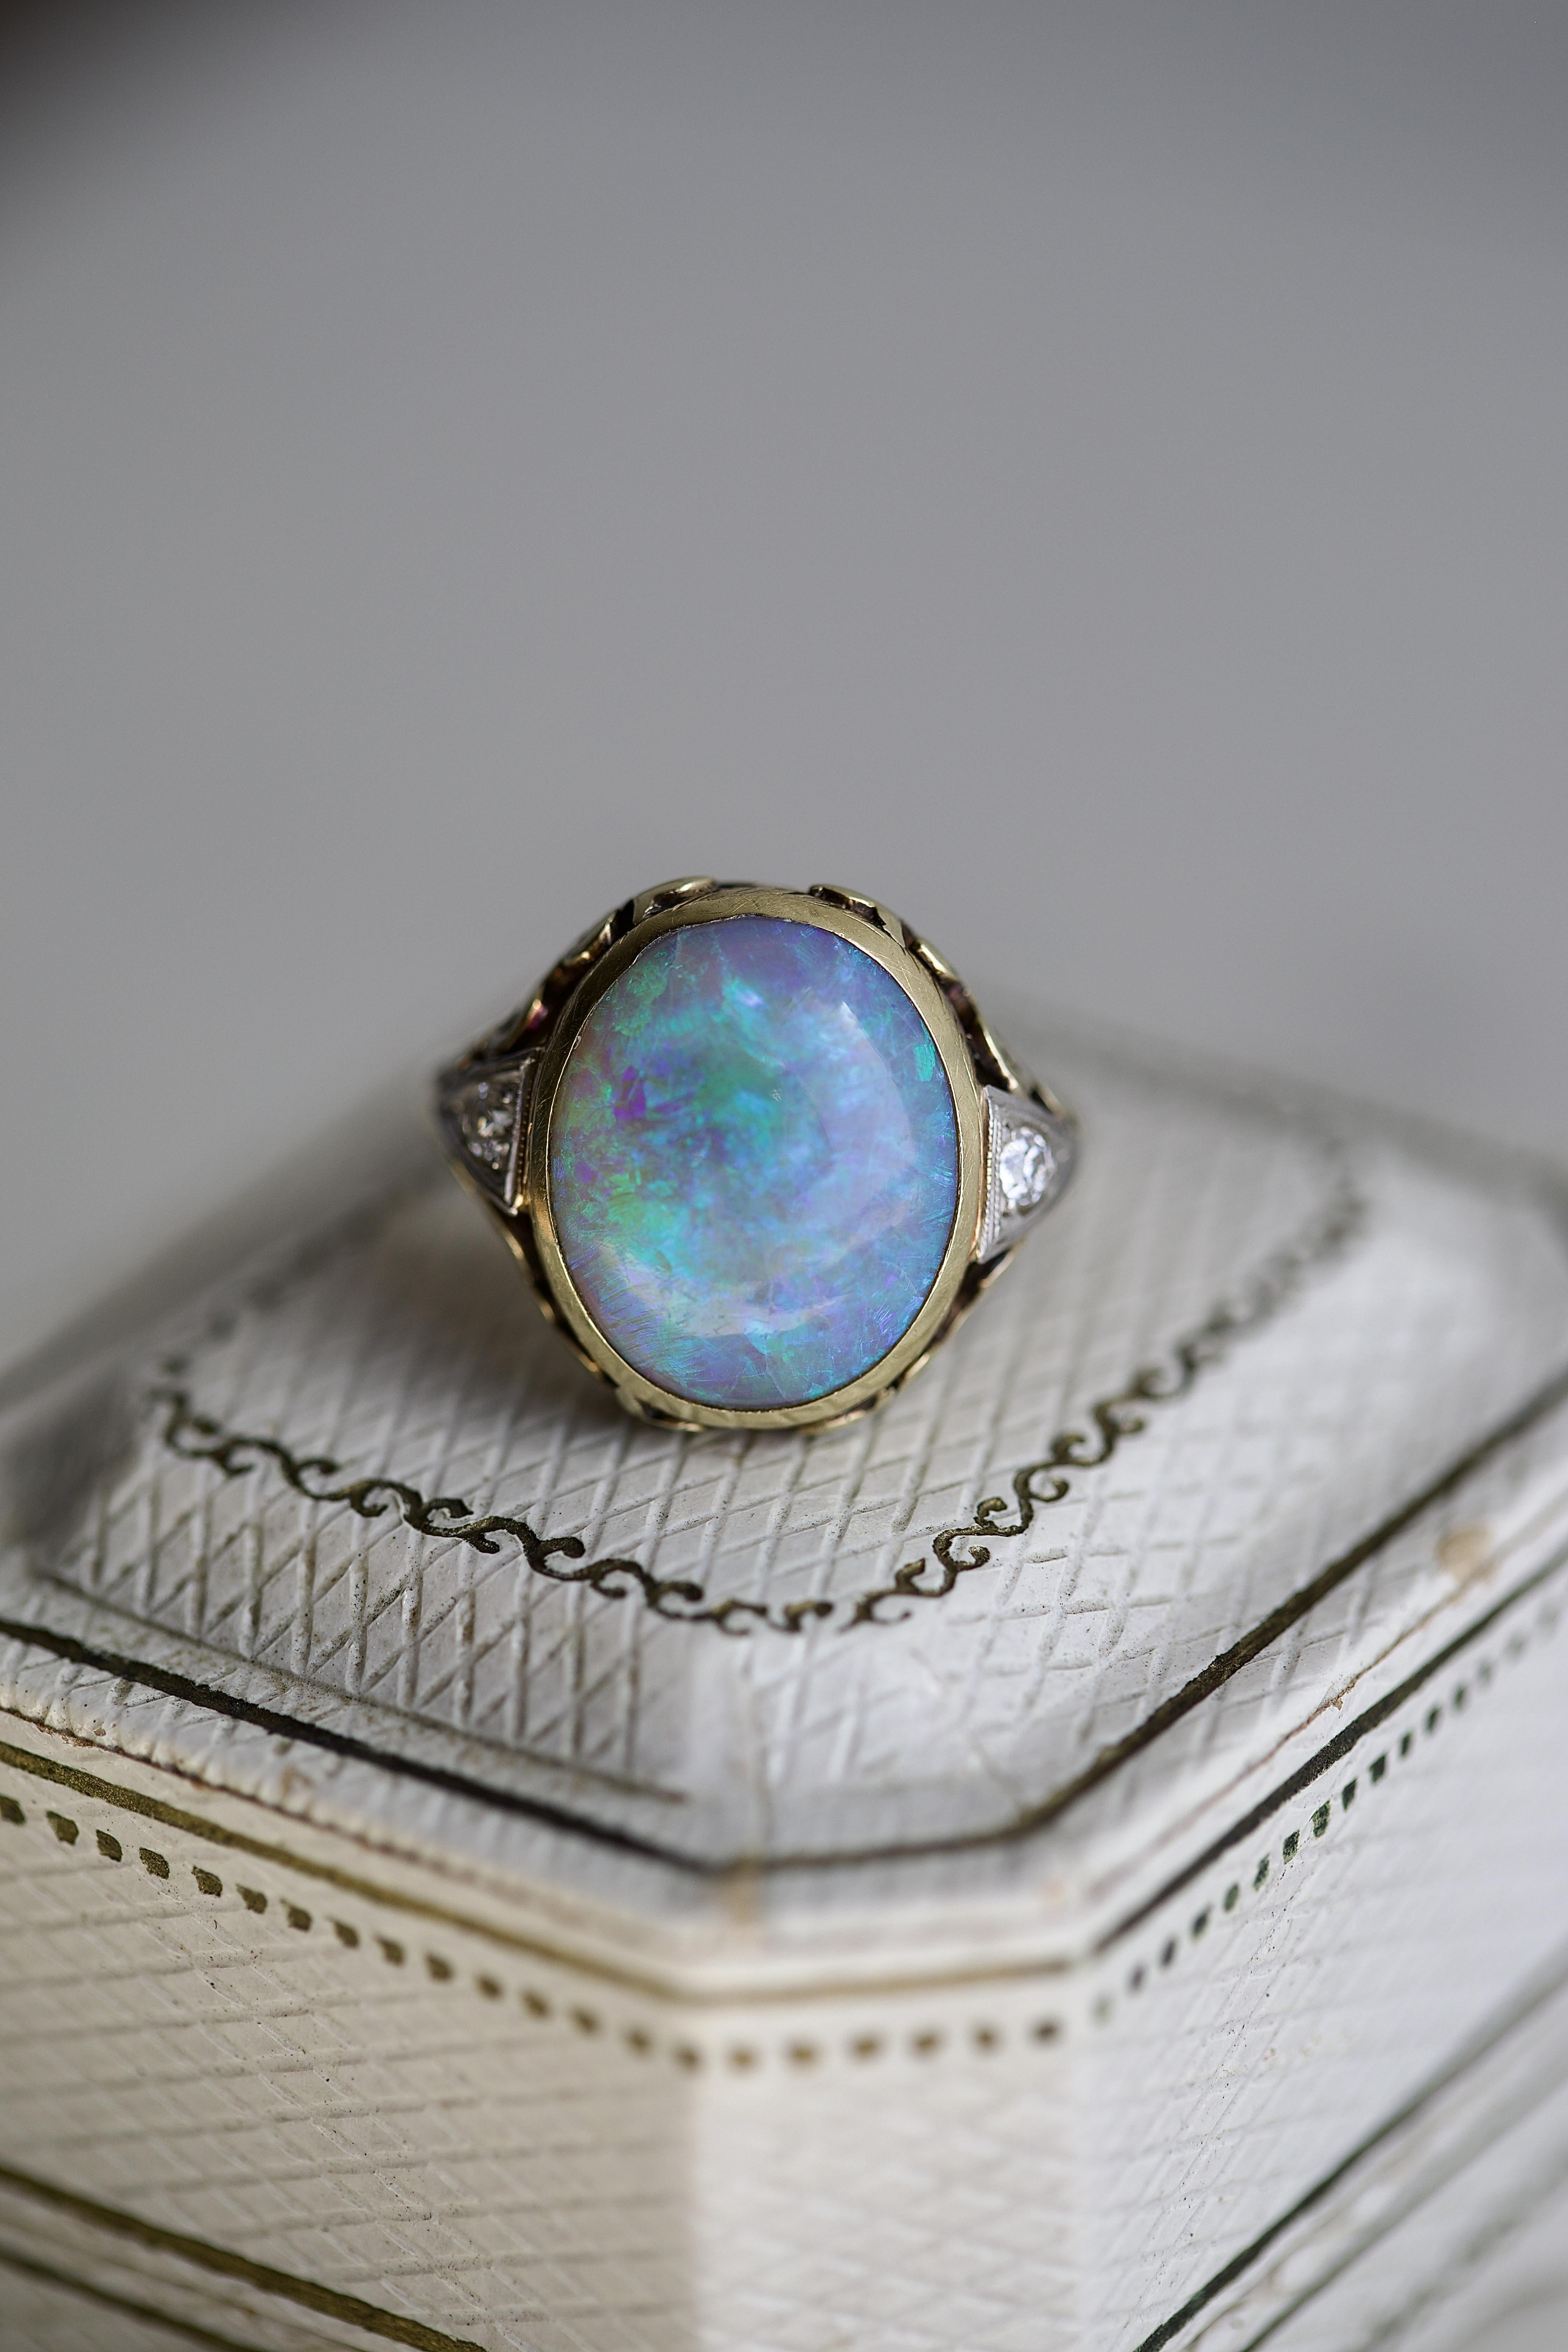 Edwardian 6 Carat Opal Diamond Yellow Gold Ring In Excellent Condition For Sale In Beverly Hills, CA